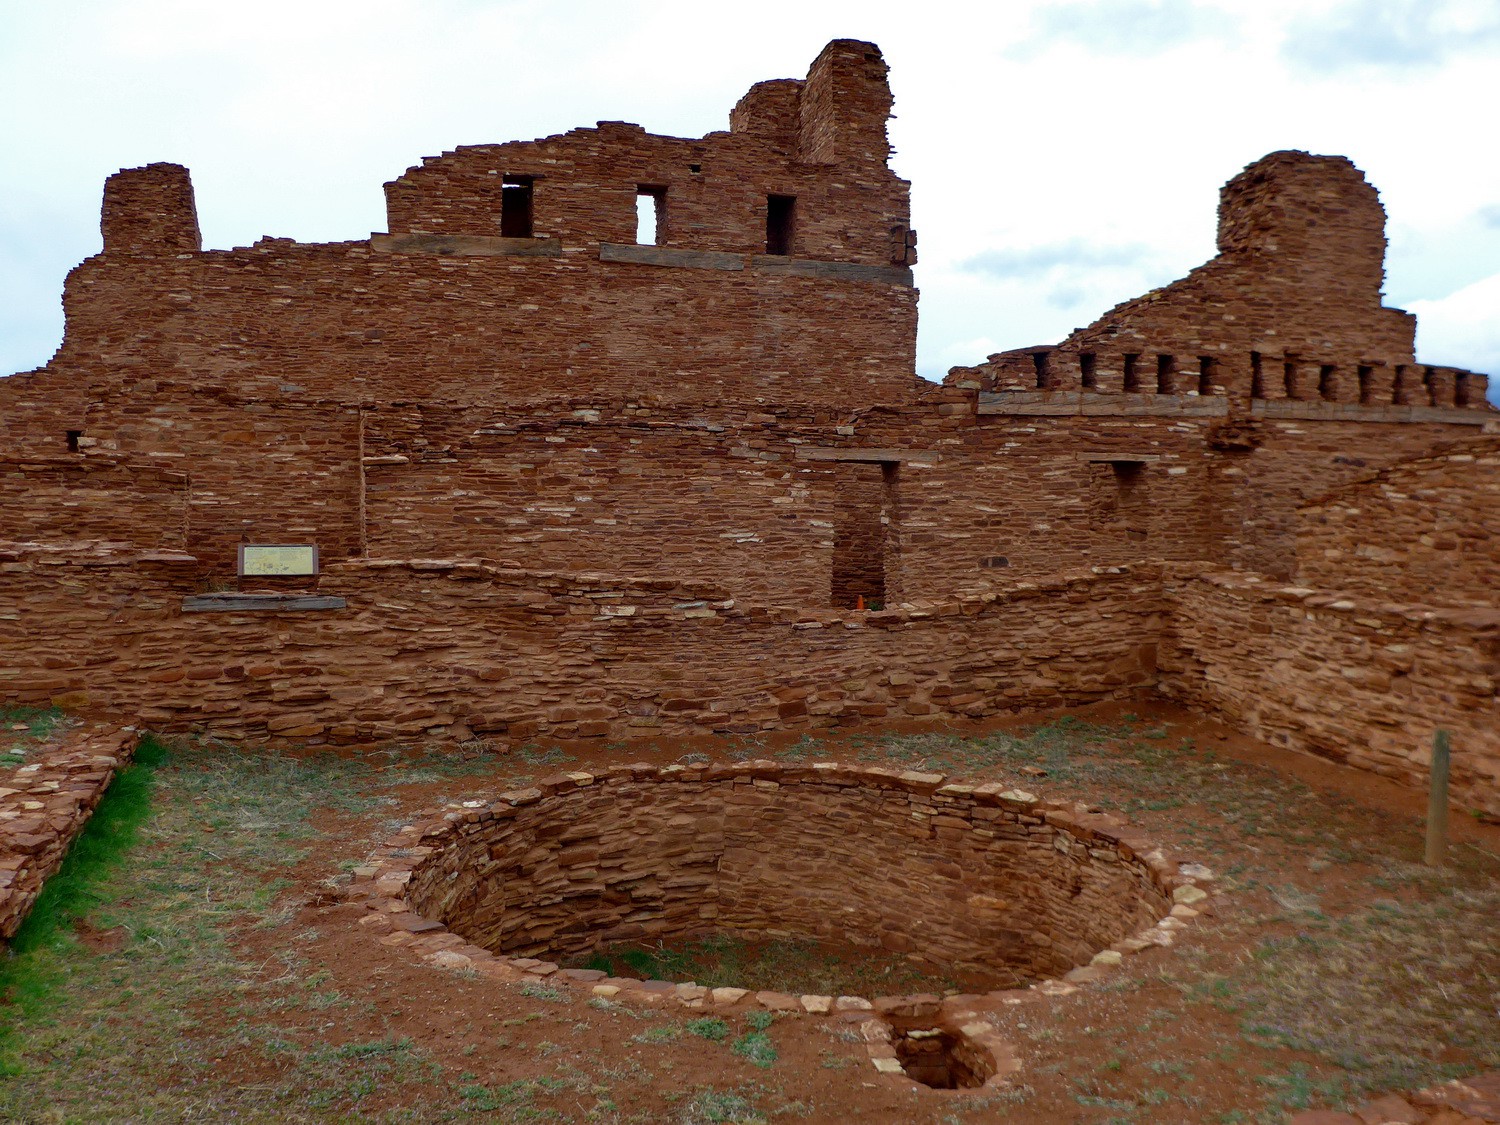 Mission of San Gregorio de Abó with a round Kiva of the Indian people in the foreground